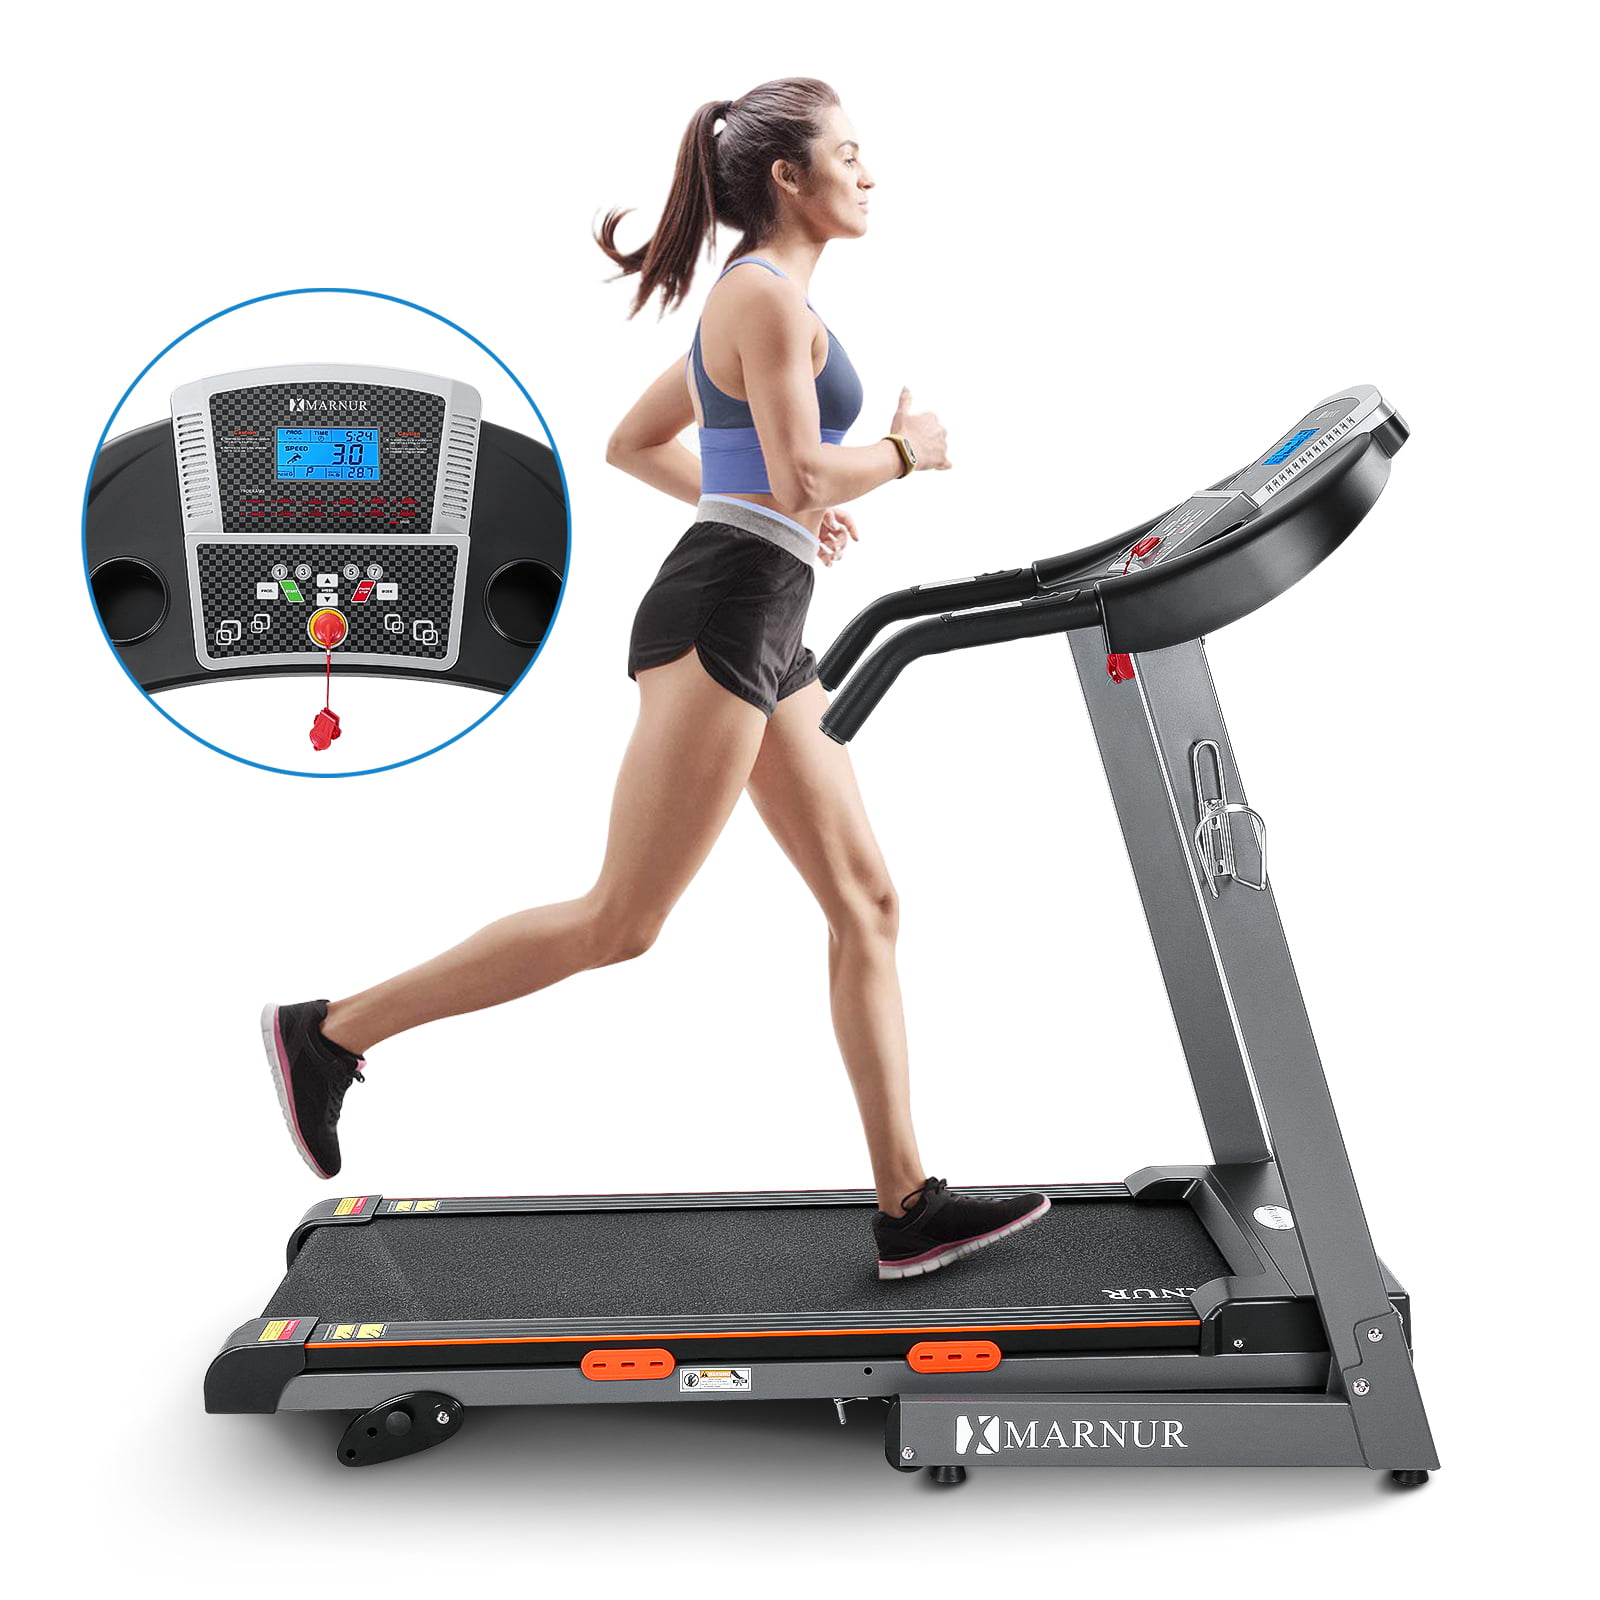 Details about   Manual Treadmill Folding Portable Running Gym Fitness Walking Machine US 